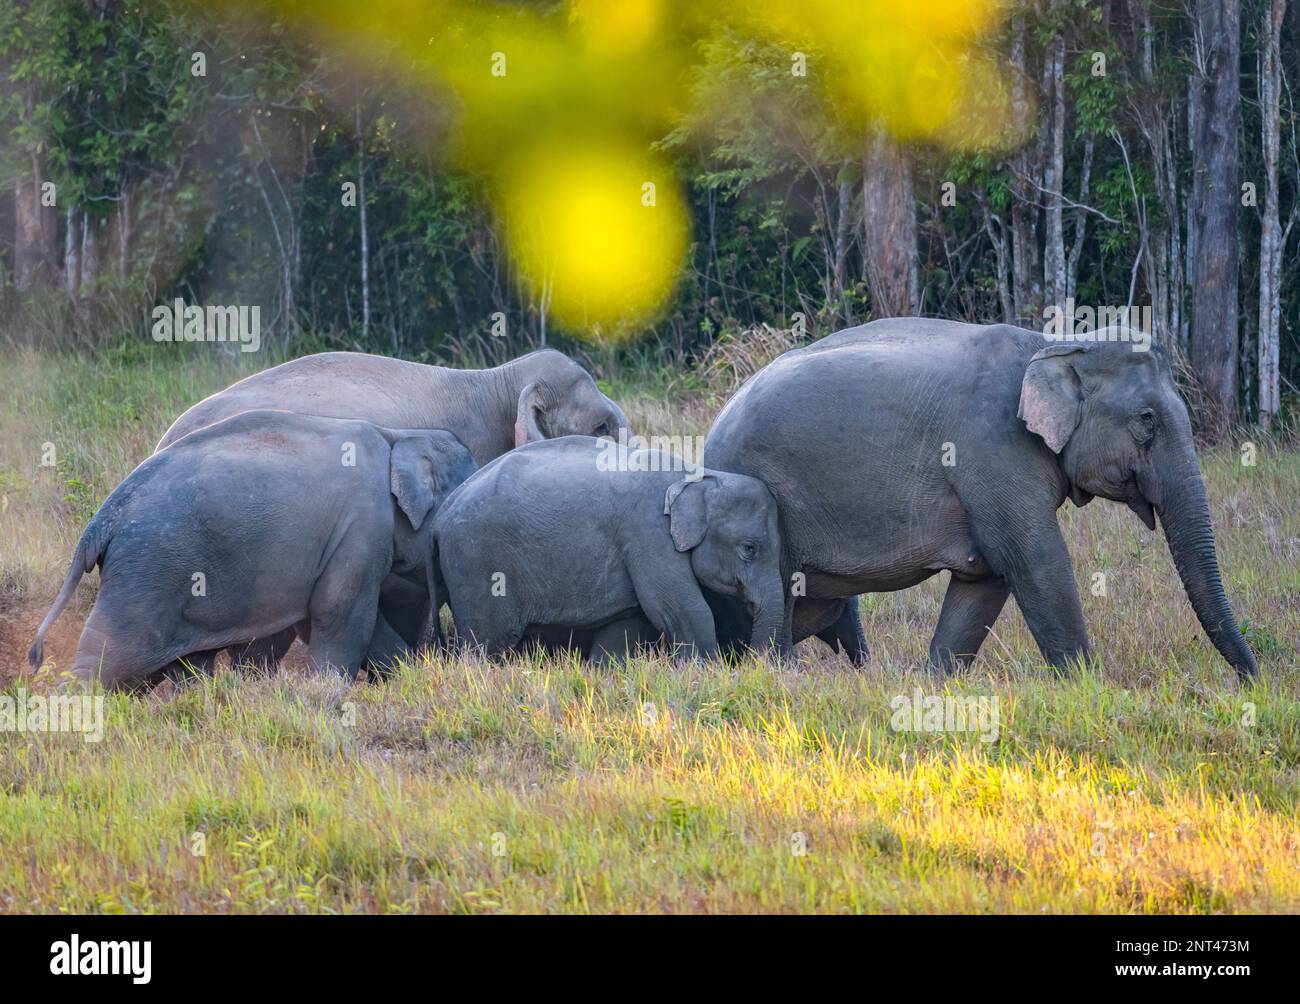 A herd Asian Elephants (Elephas maximus) with young. Thailand. Stock Photo